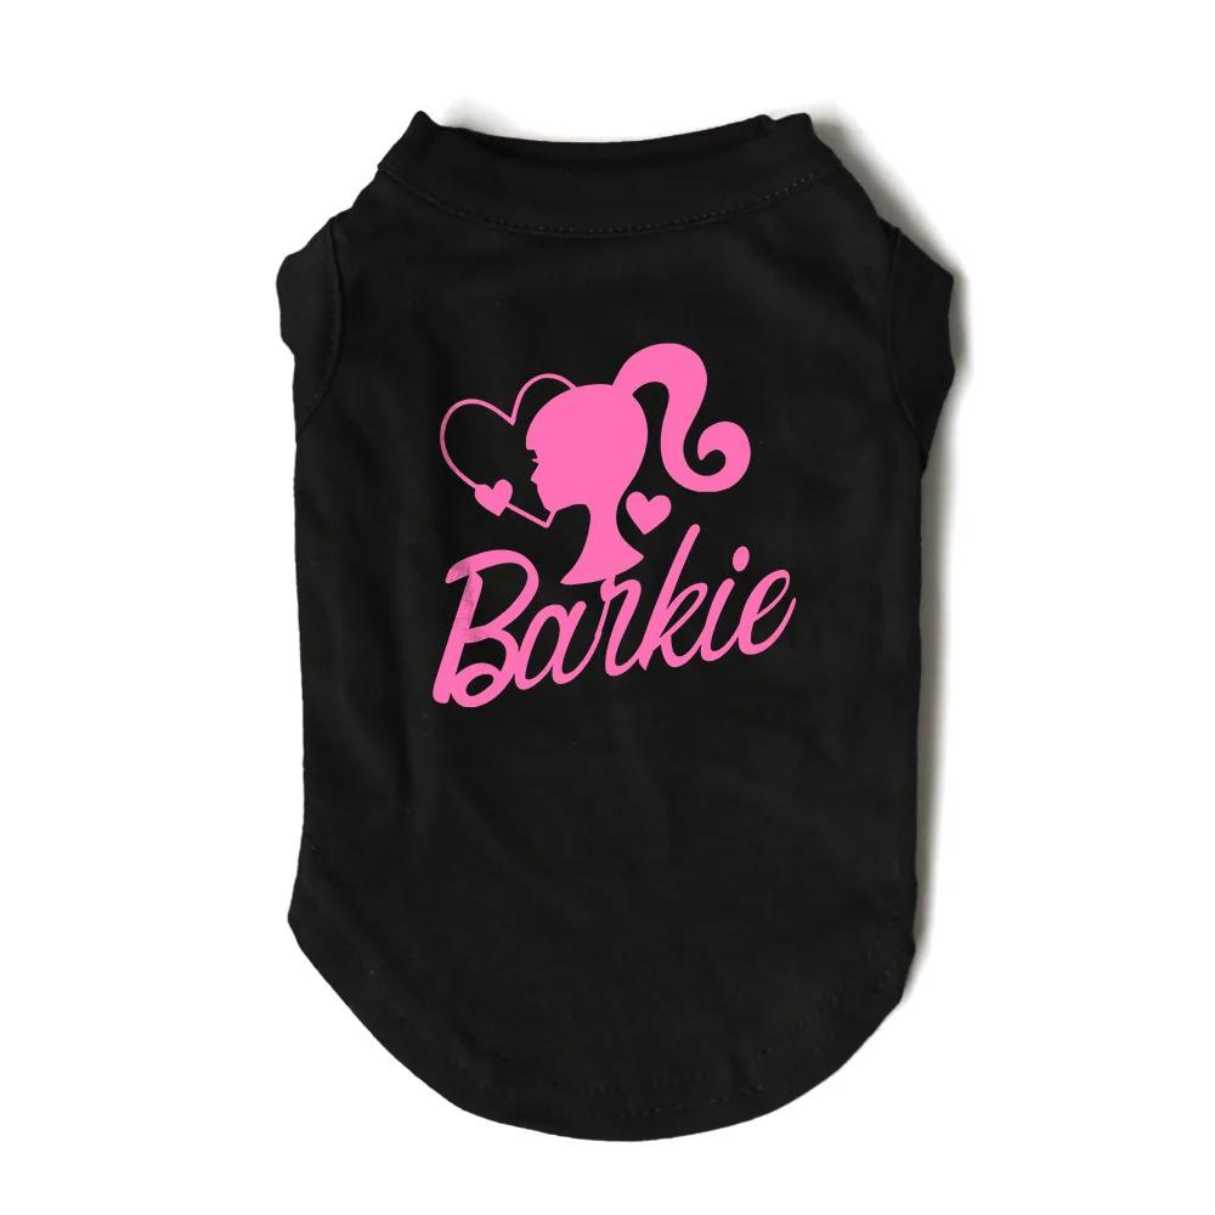 Barkie Doll Black Tshirt, Singlet, Sleeveless With Pink text with barbie on it.